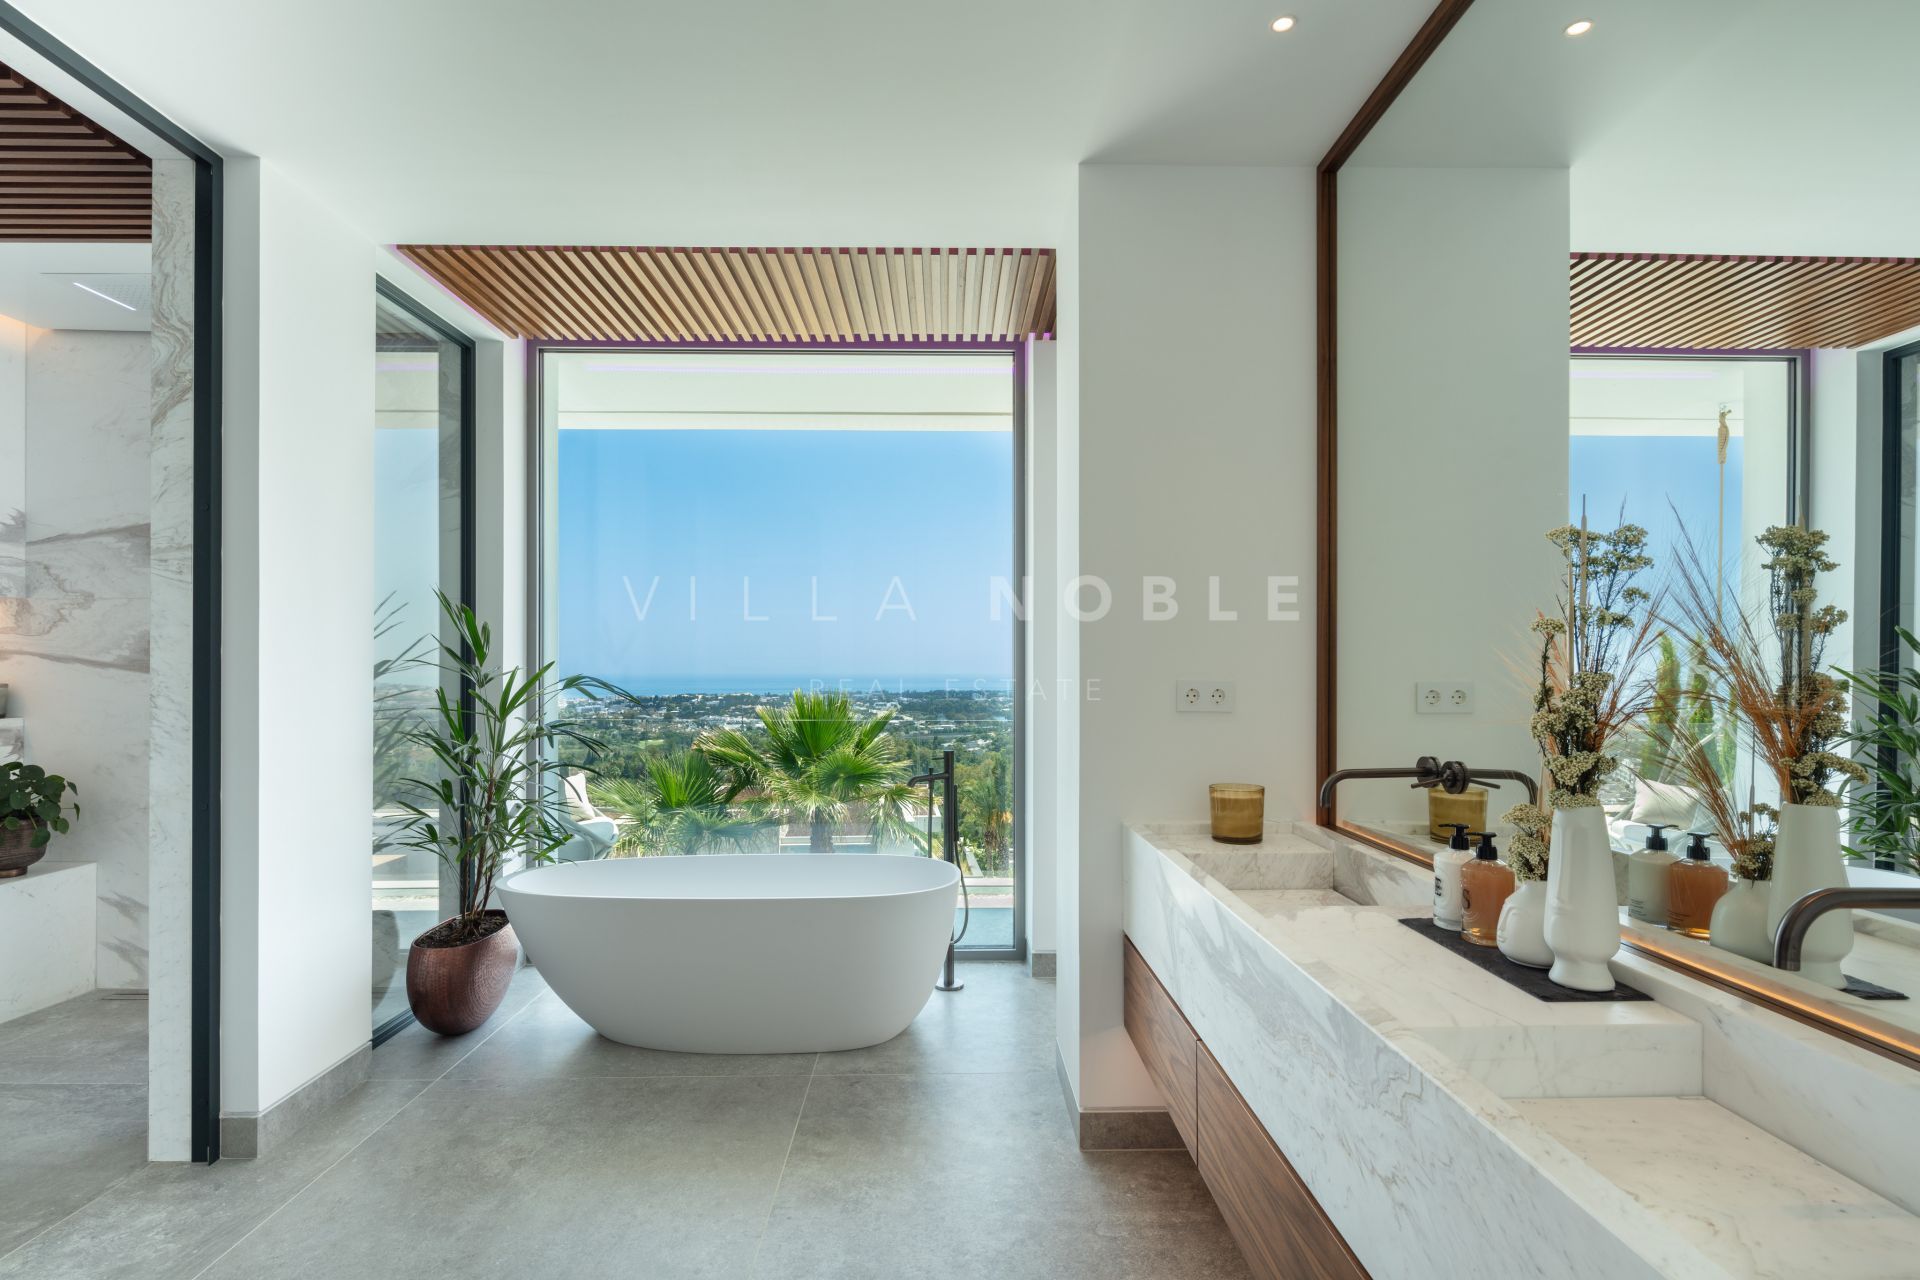 Modern architectural masterpiece situated on the hills of La Quinta, Benahavis